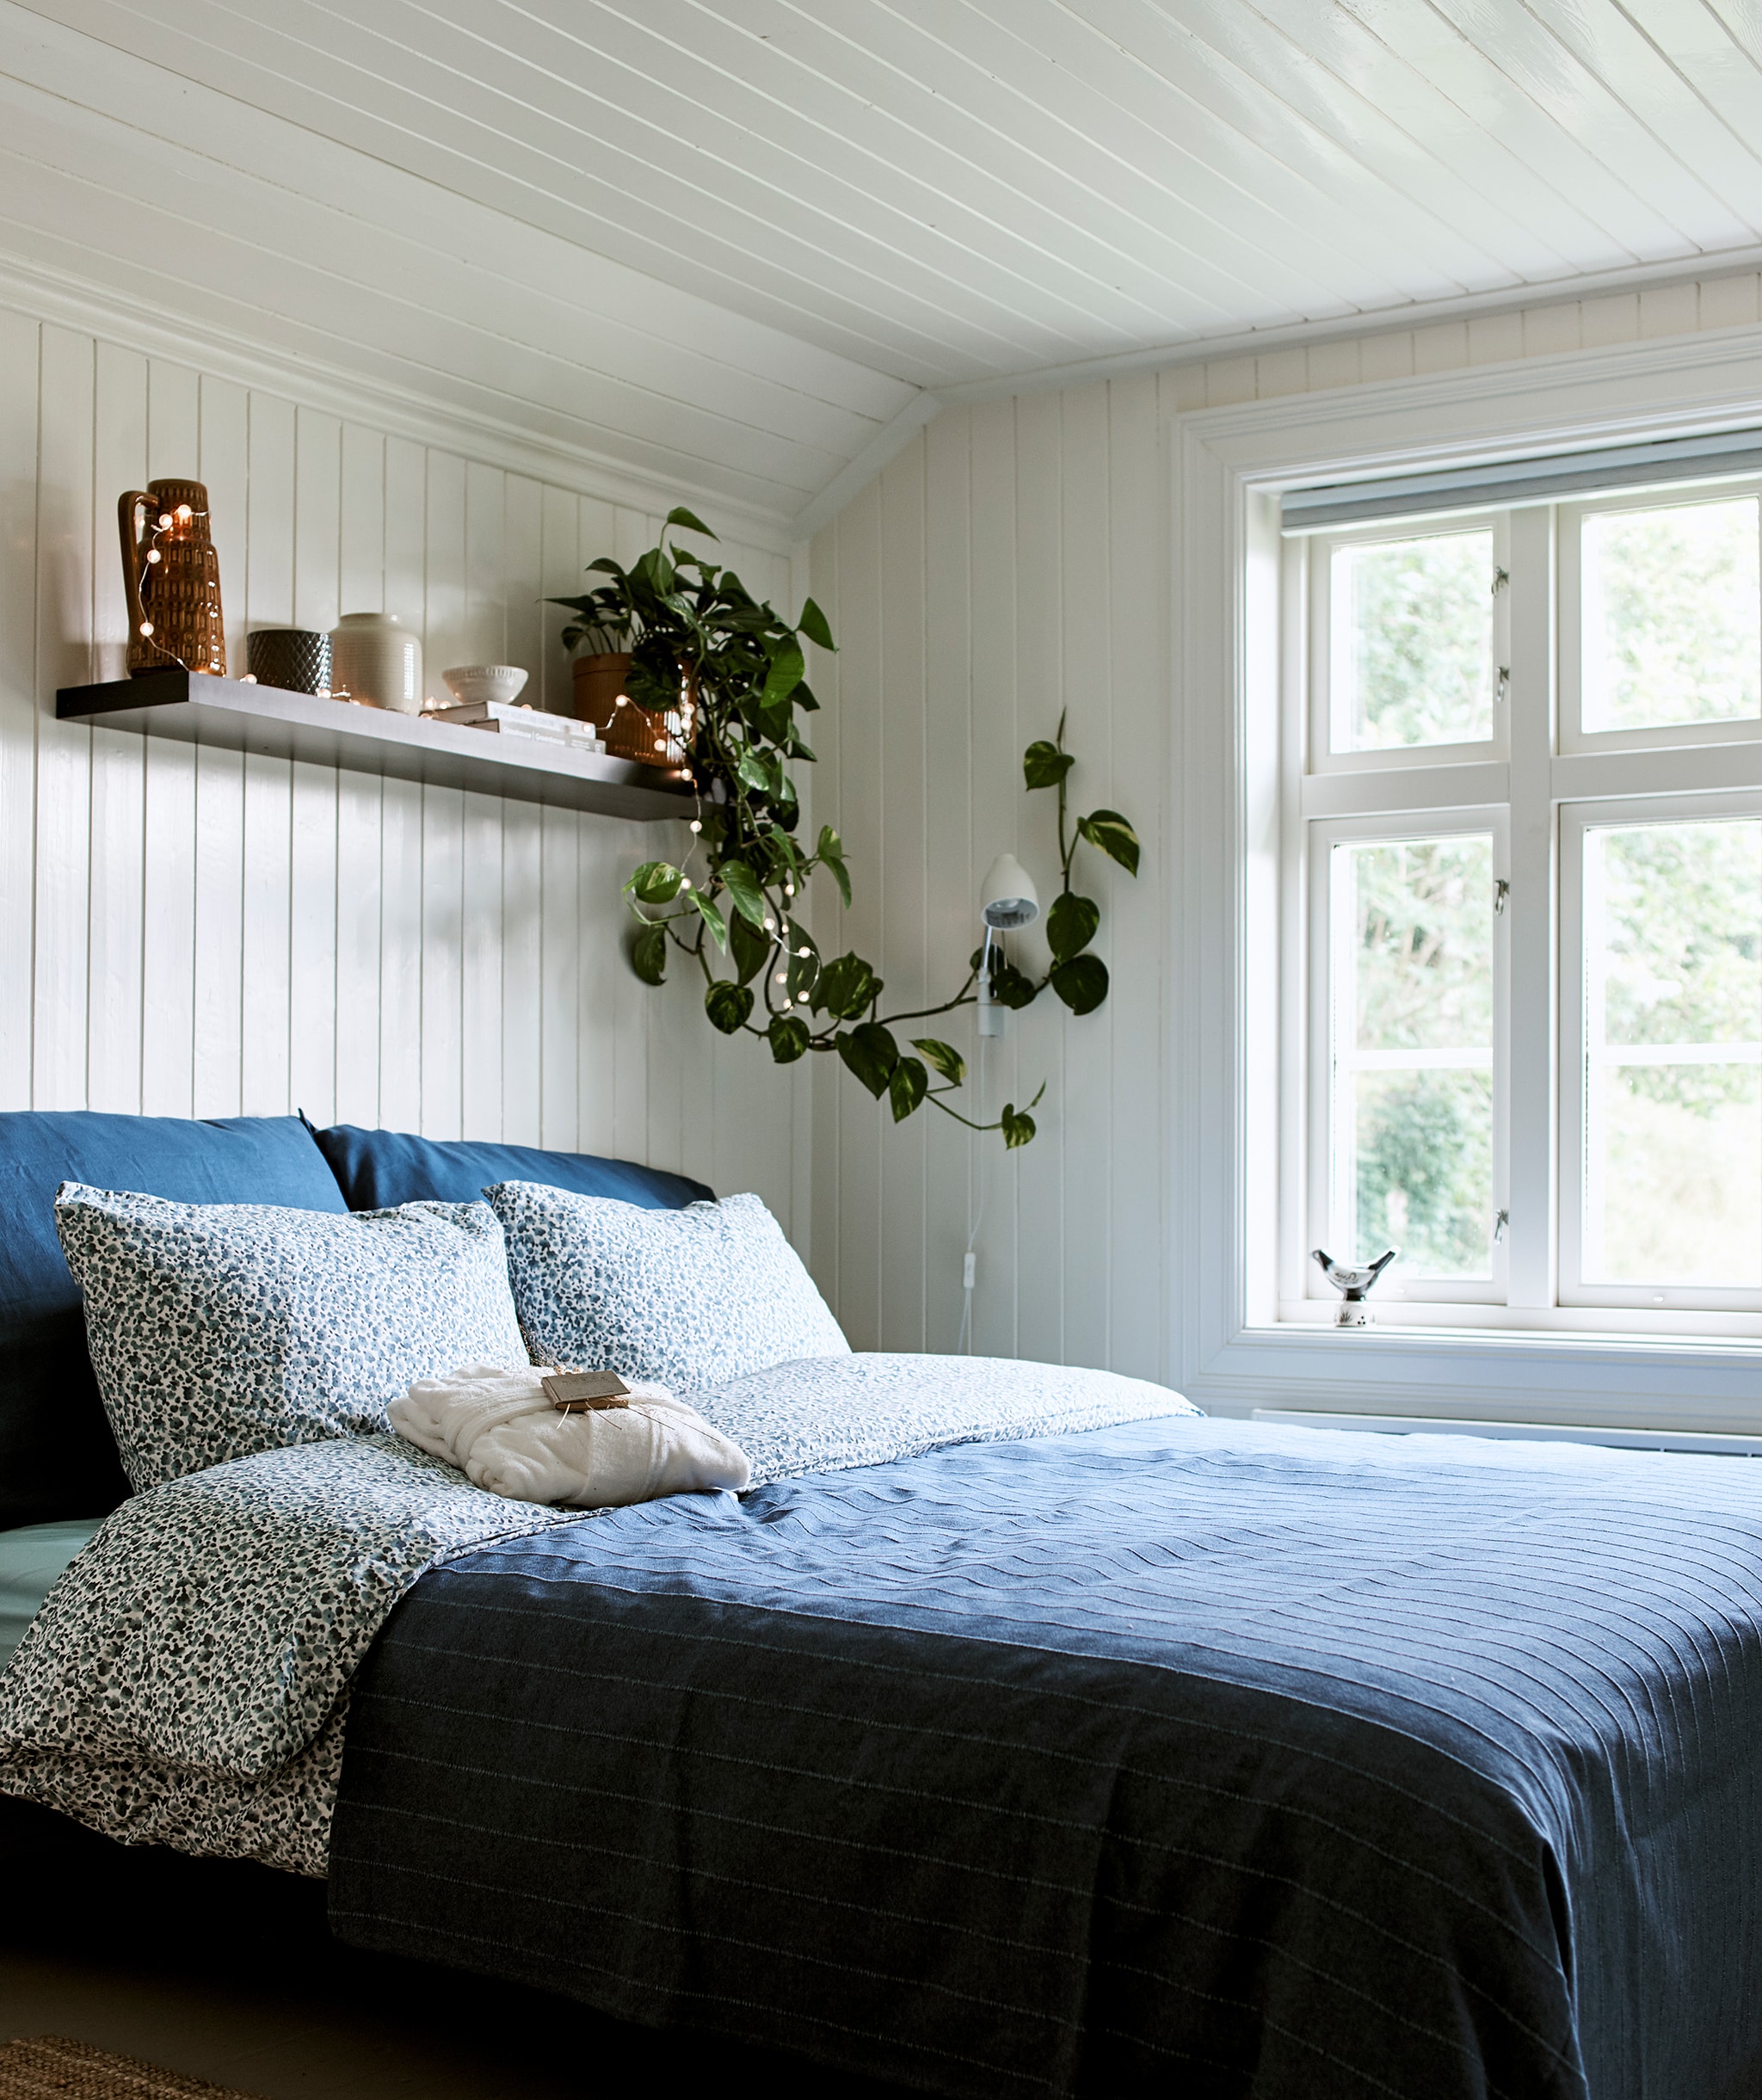 A farmhouse bedroom with white wood panelling and bed dressed in blue bedding with a wall shelf above to store and display.